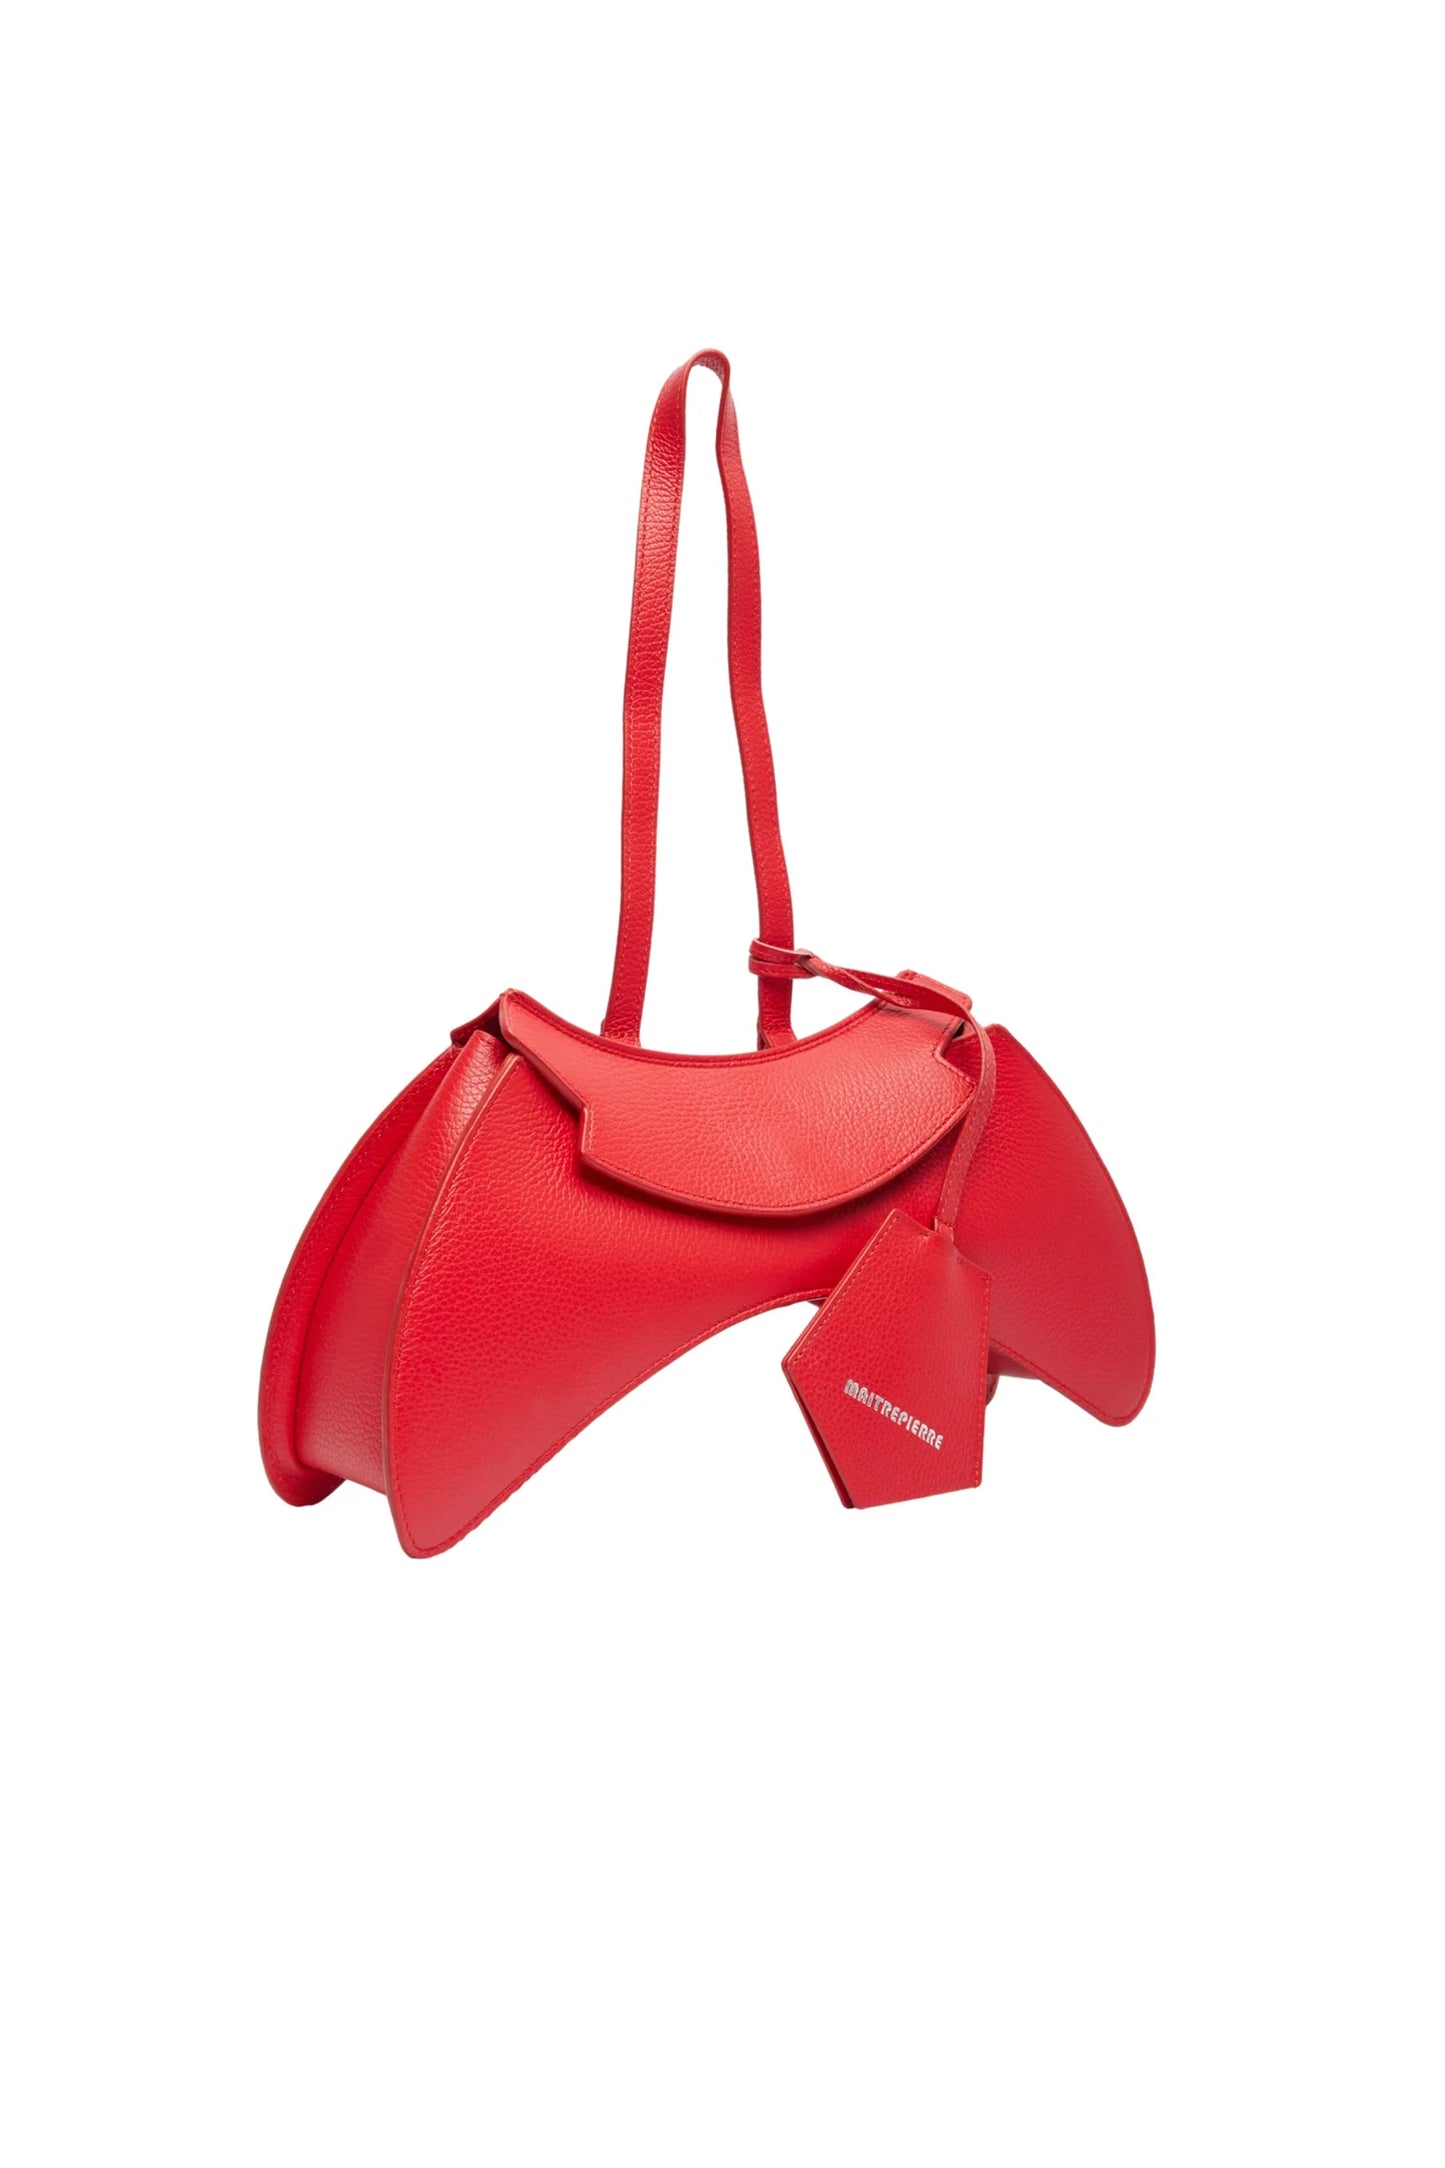 SAC "MANNETTE" RED